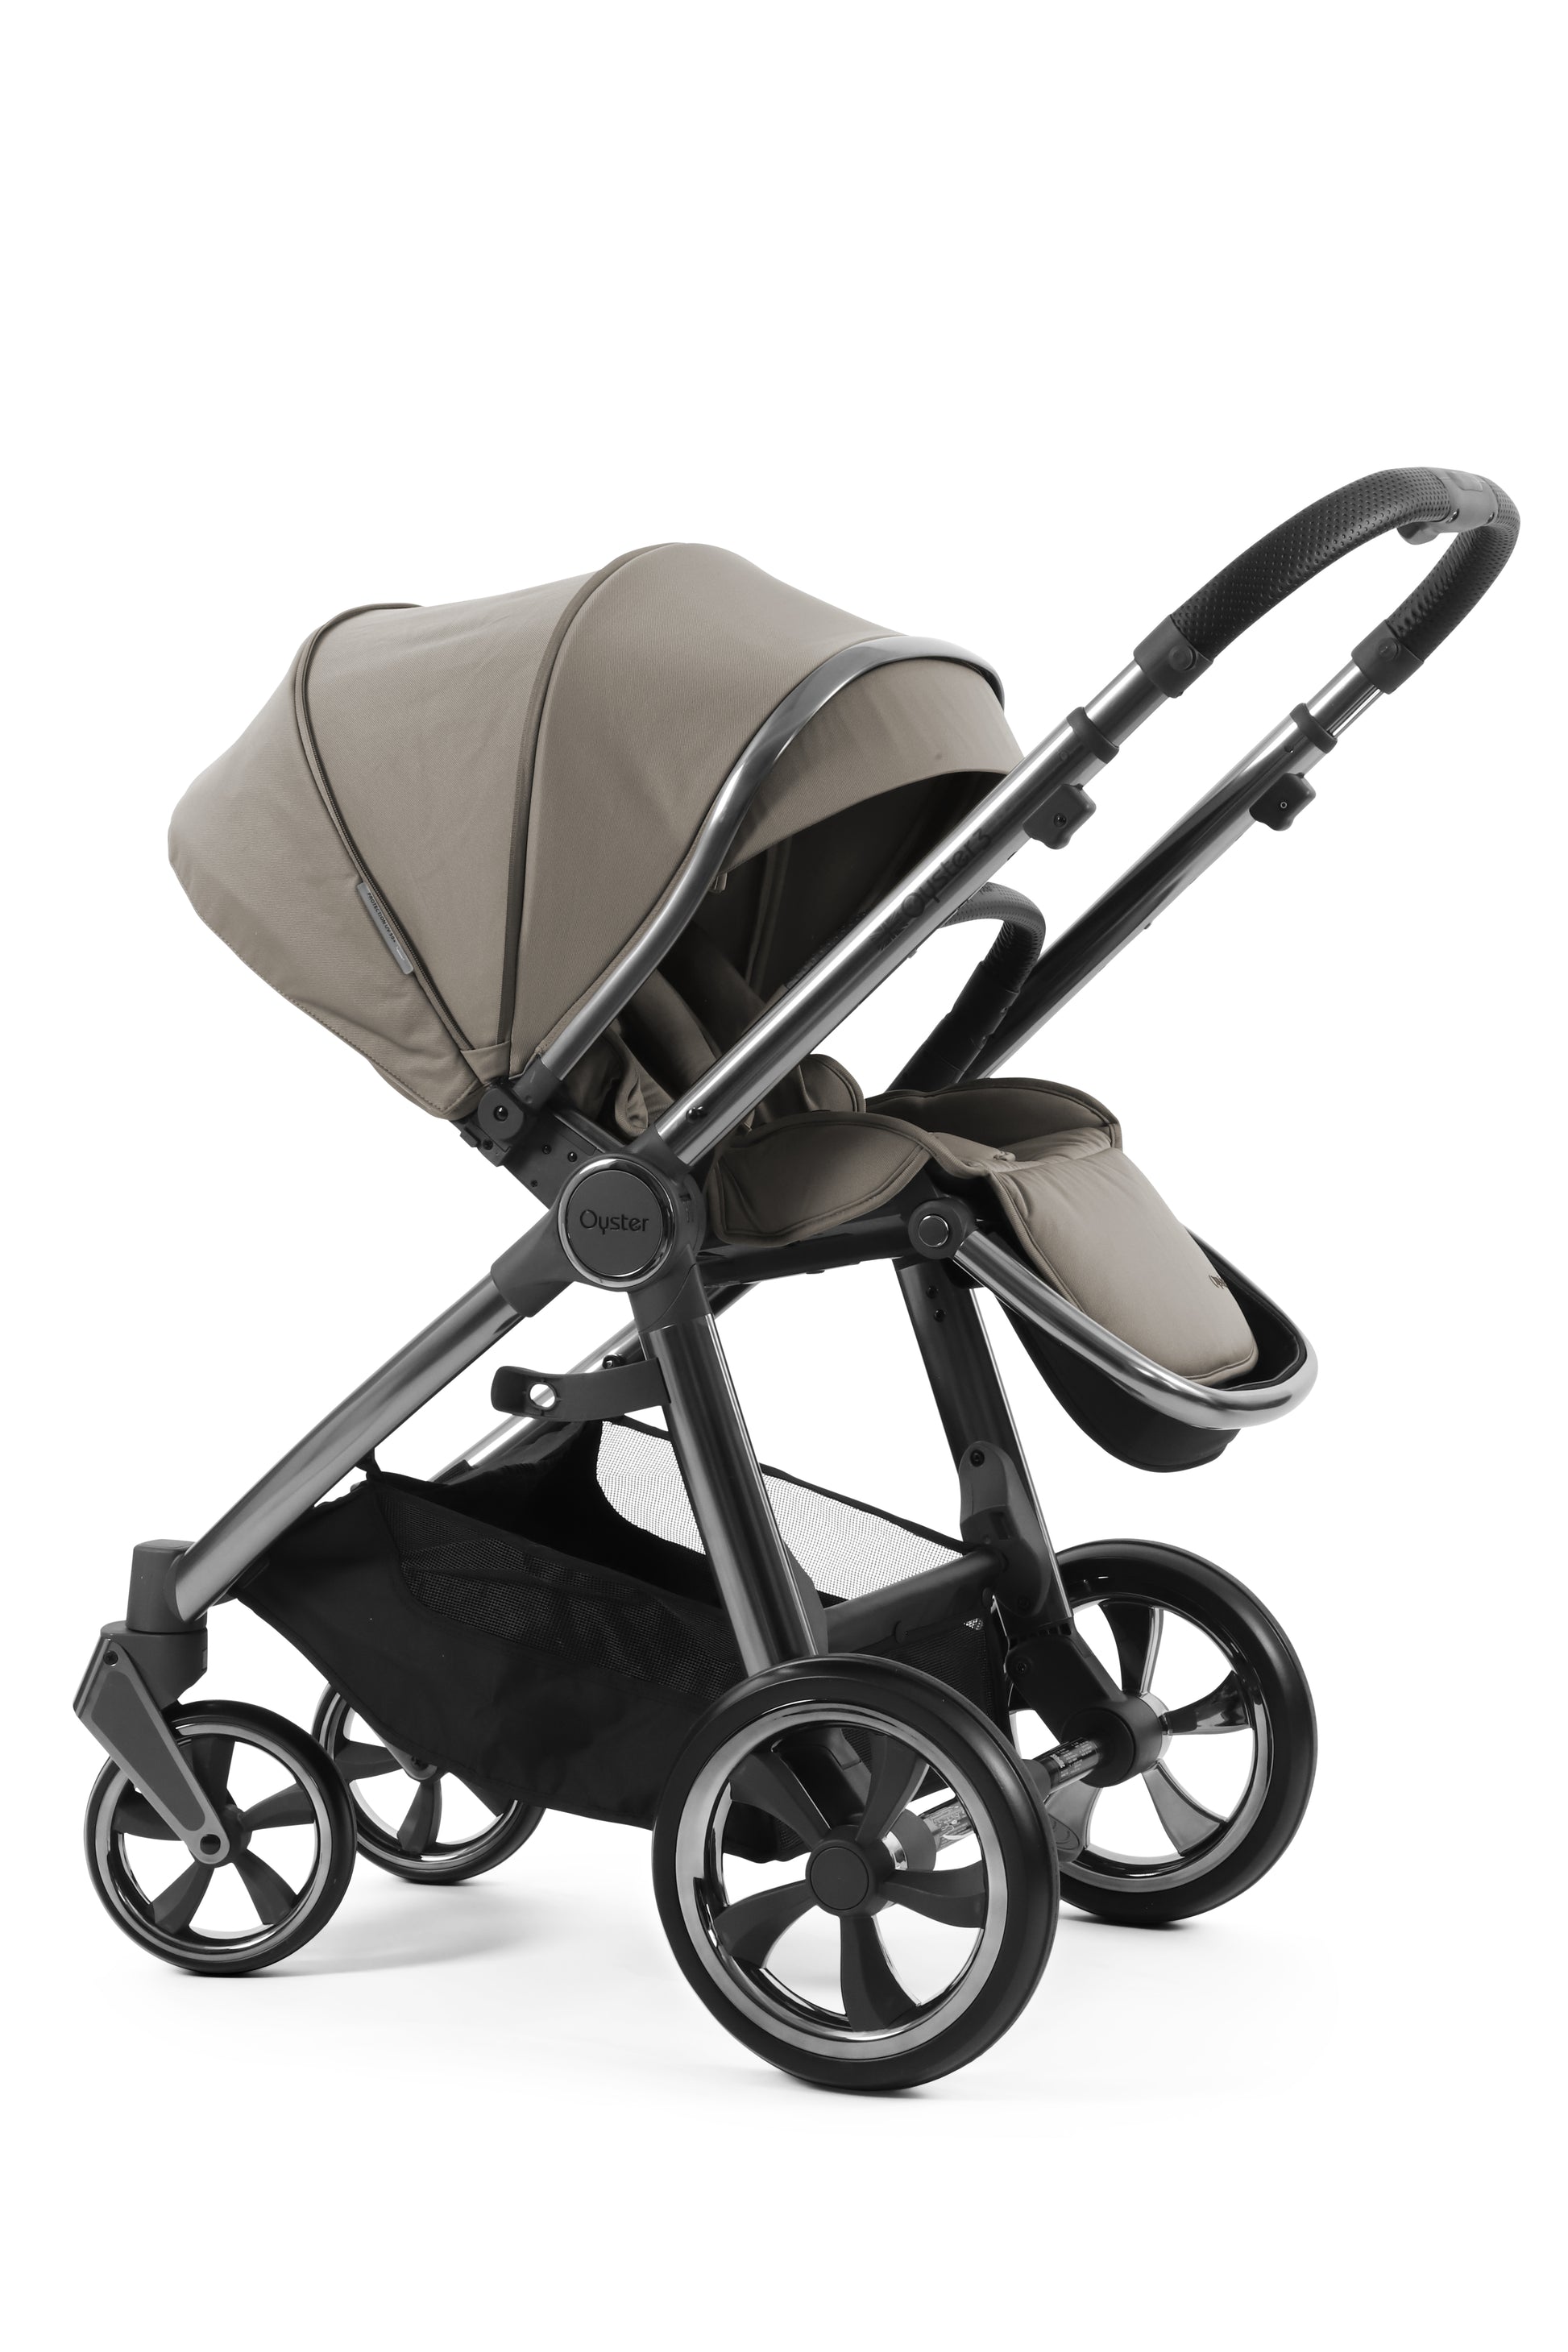 Oyster 3 Ultimate 12 Piece Maxi Cosi Pebble Pro 360 Travel System | Stone (Gun Metal Chassis)